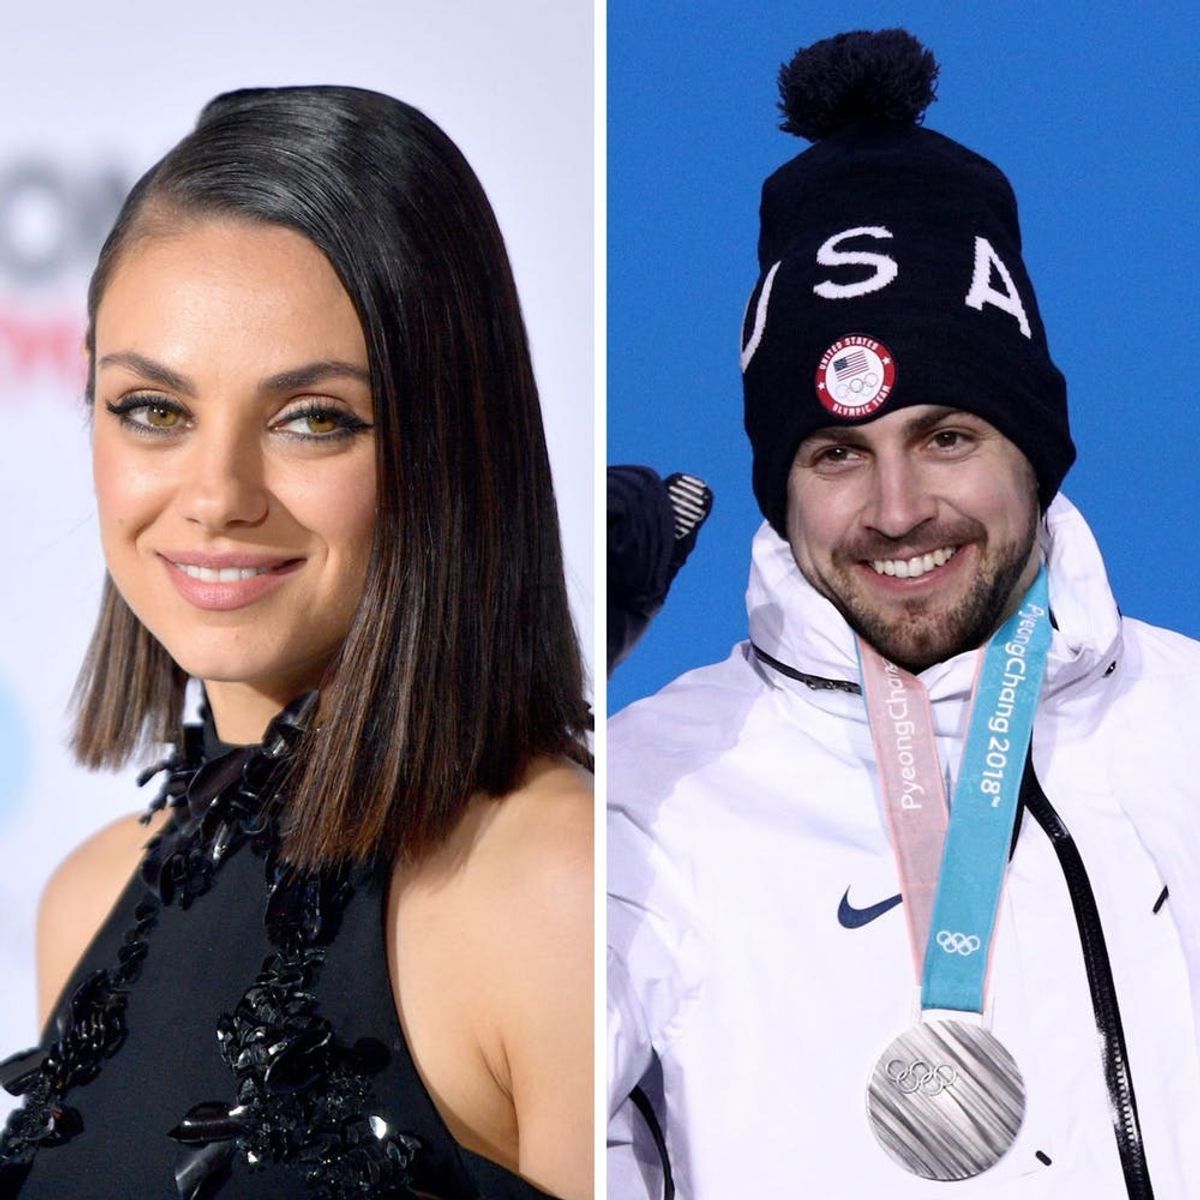 See Mila Kunis’ Surprise Video Message for Olympian Chris Mazdzer